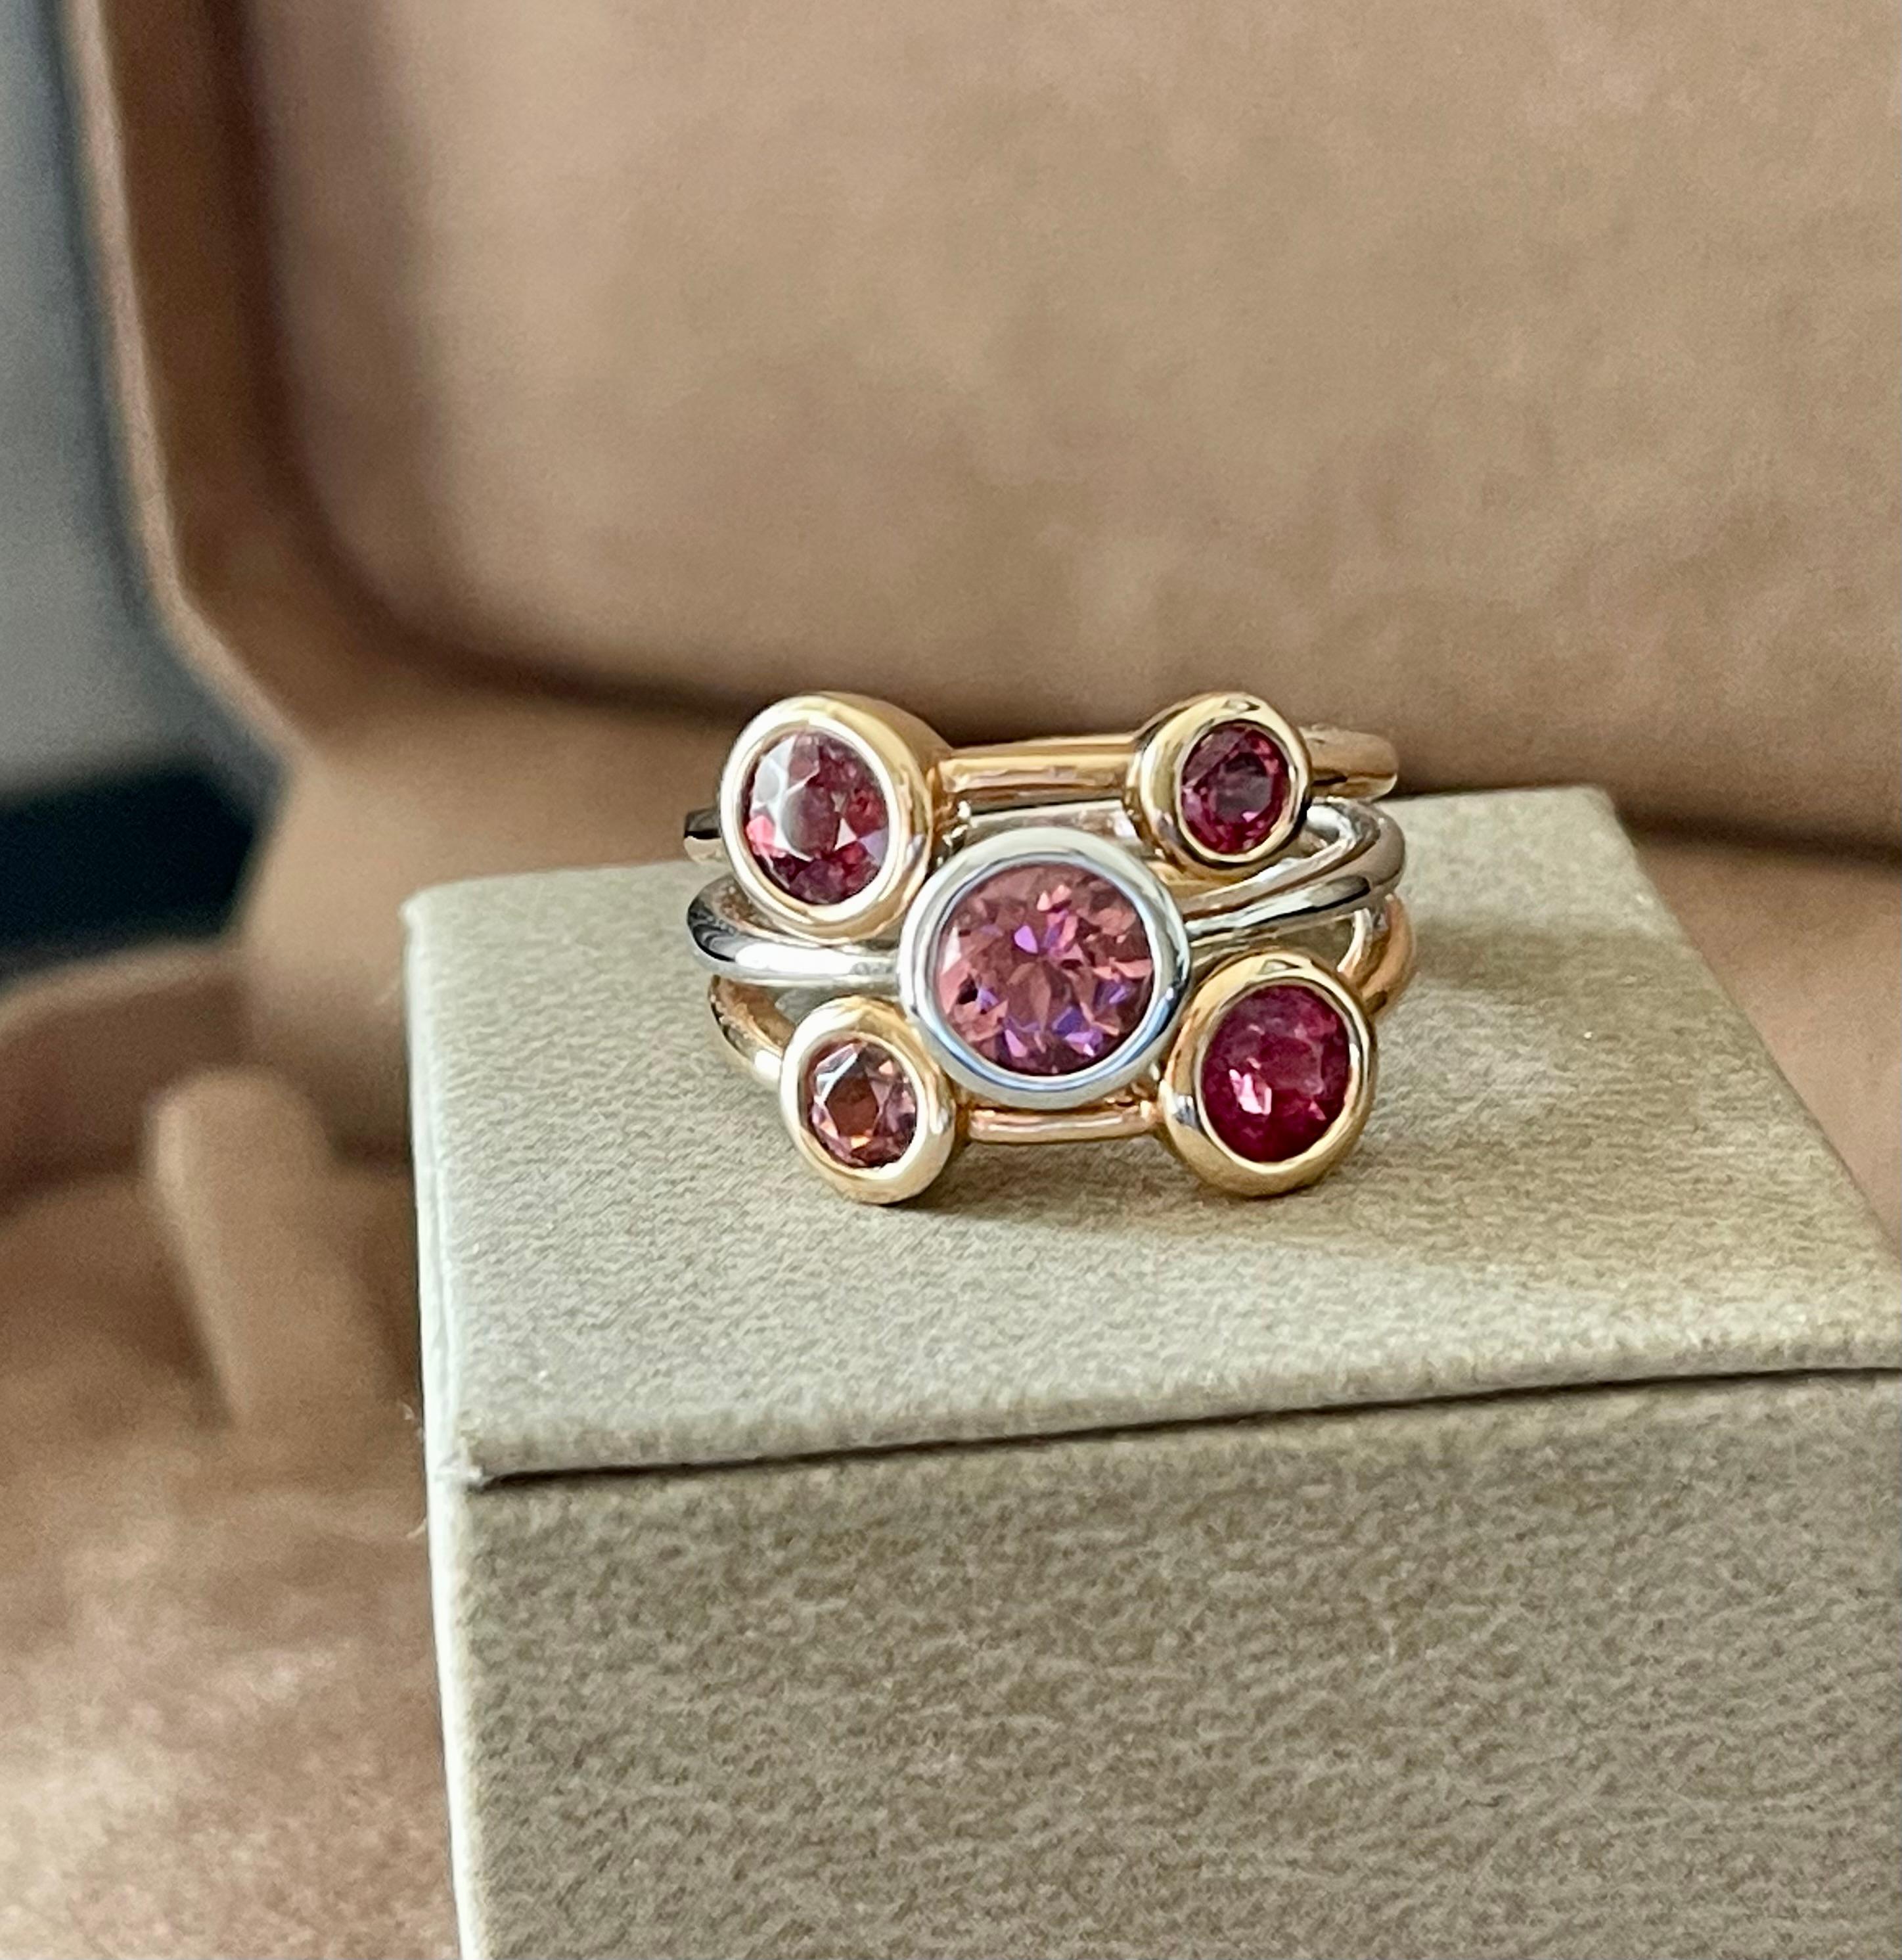 Unusual and modern 18 K white and rose Gold Ring featuring 5 pink Tourmalines with a total weight of 2.35 ct. 
The ring is currently size 55/15 ( american Ring size 7.5) but can be resized to a certain extent. 
QUESTIONS?  Contact us right away if